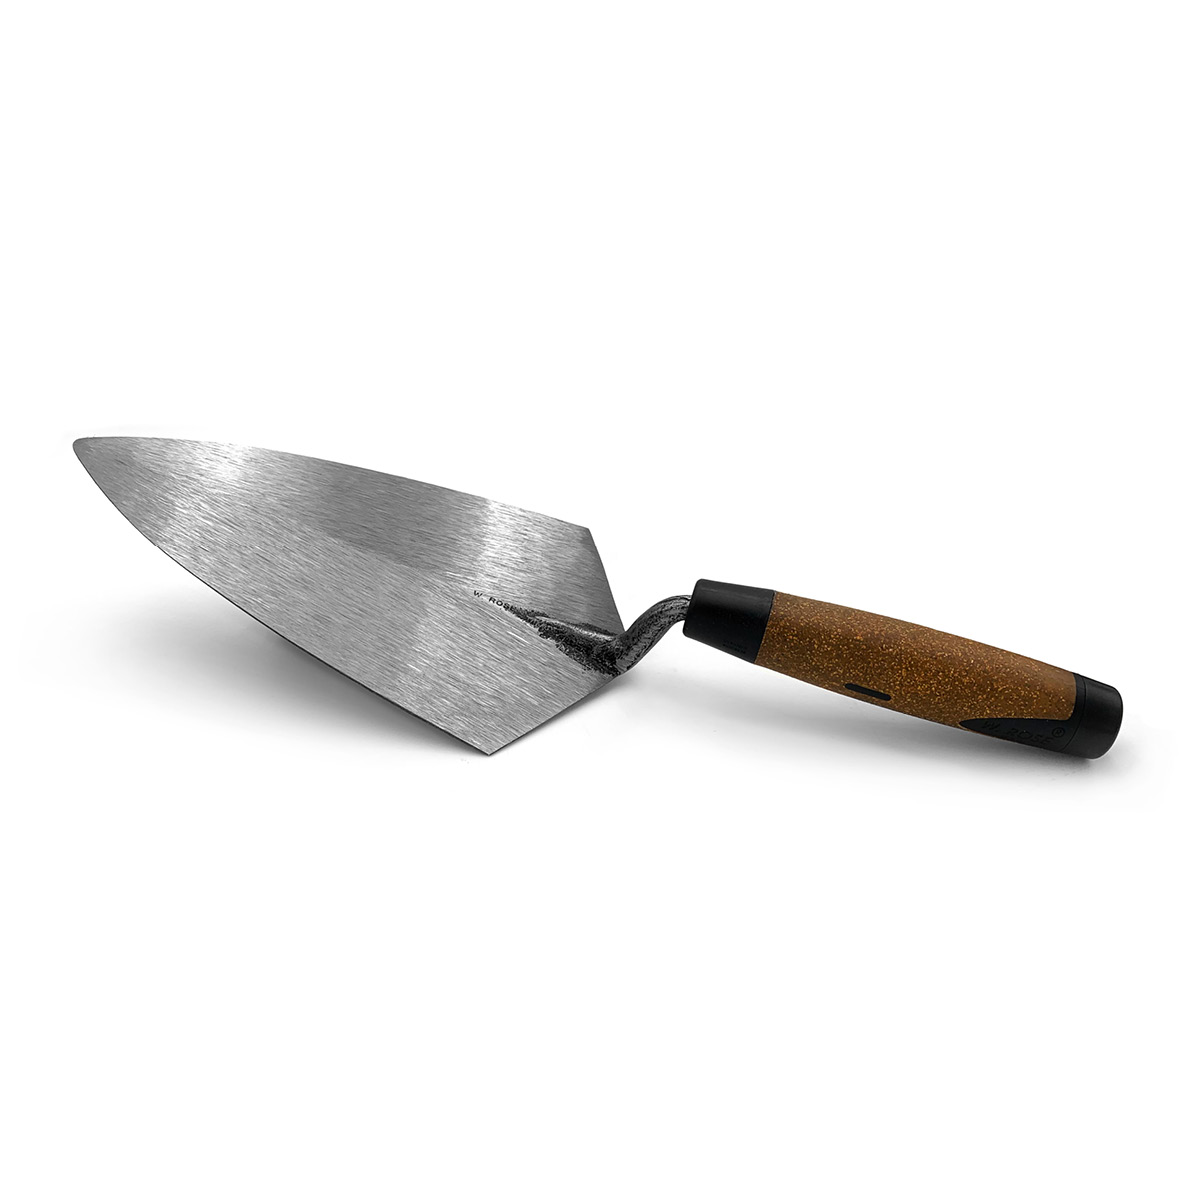 W.rose Philadelphia brick trowels with a cork handle are available via Speedcrete, United Kingdom. These forged steel trowels are a professional masonry tool of high quality.